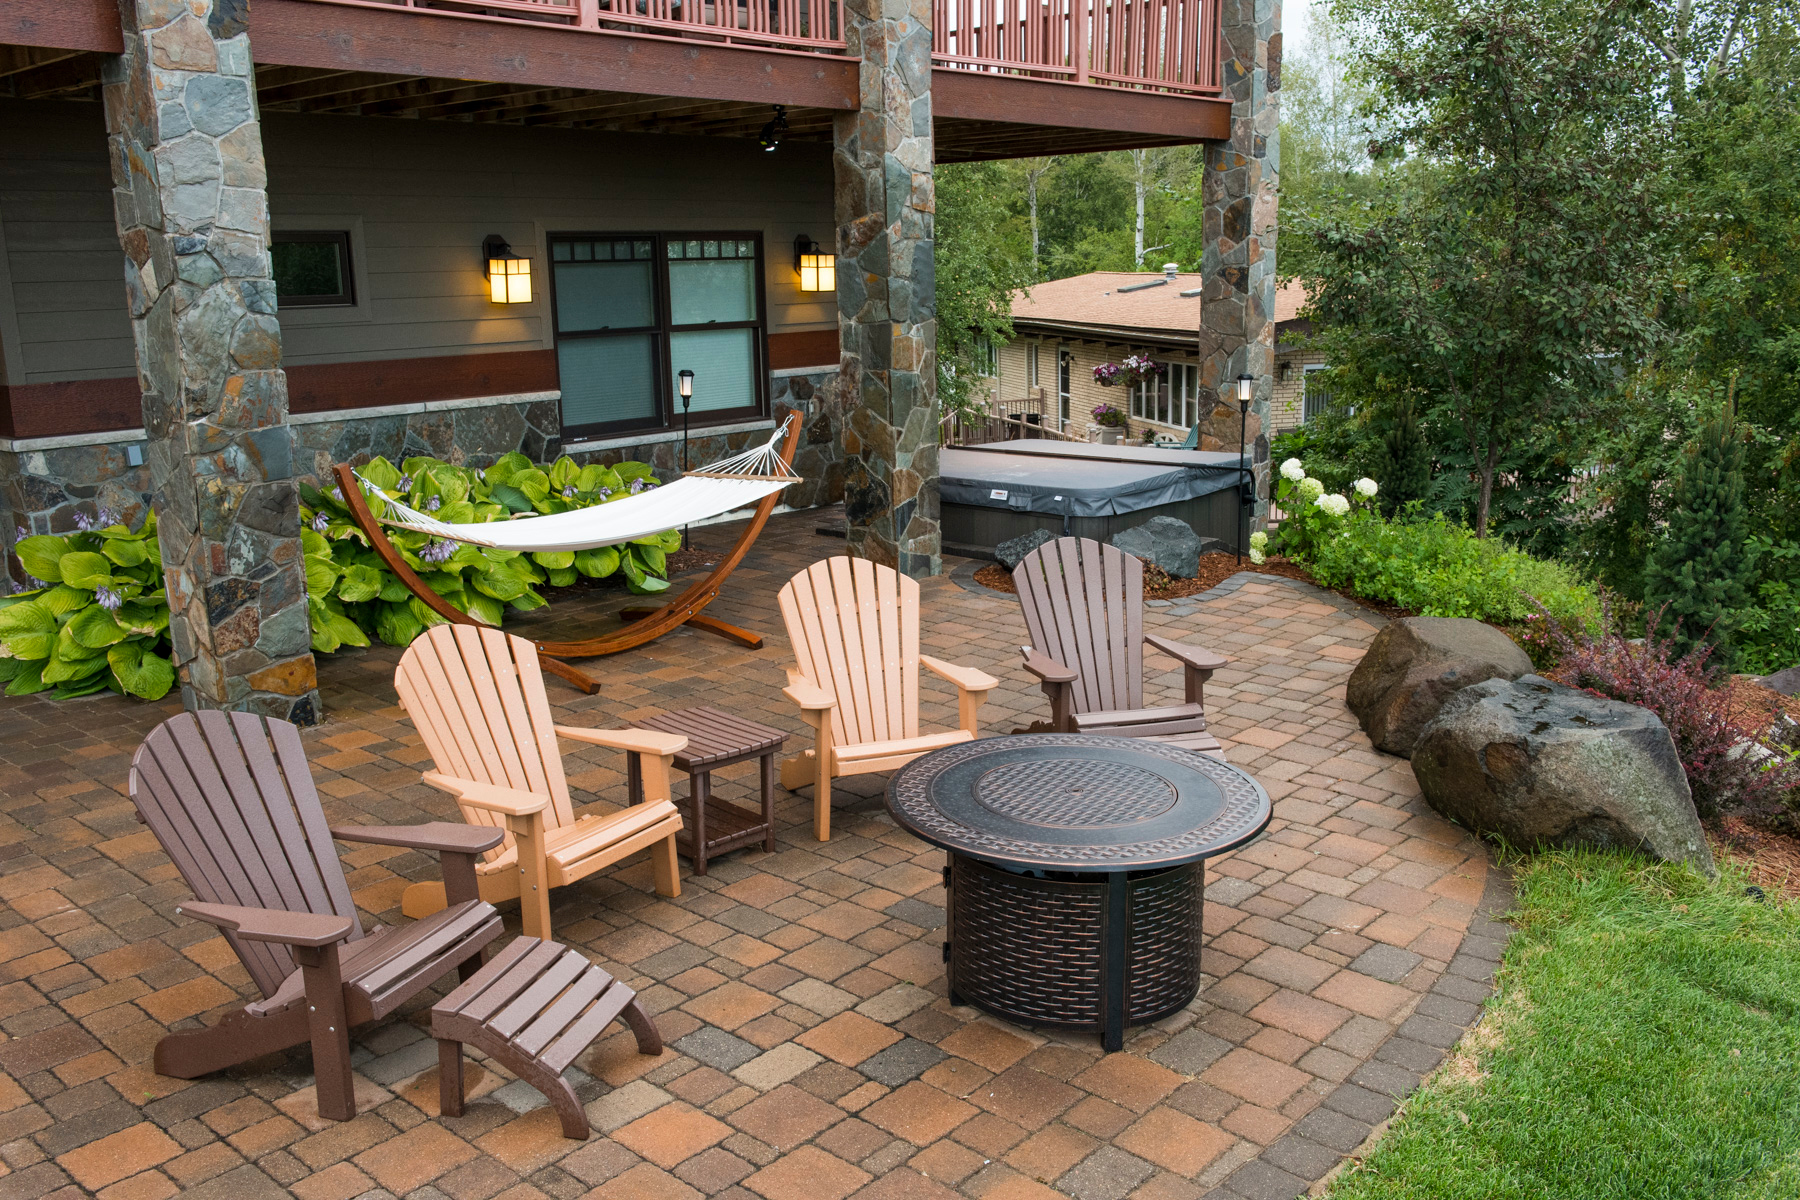 Outdoor patio with chairs and a hammock